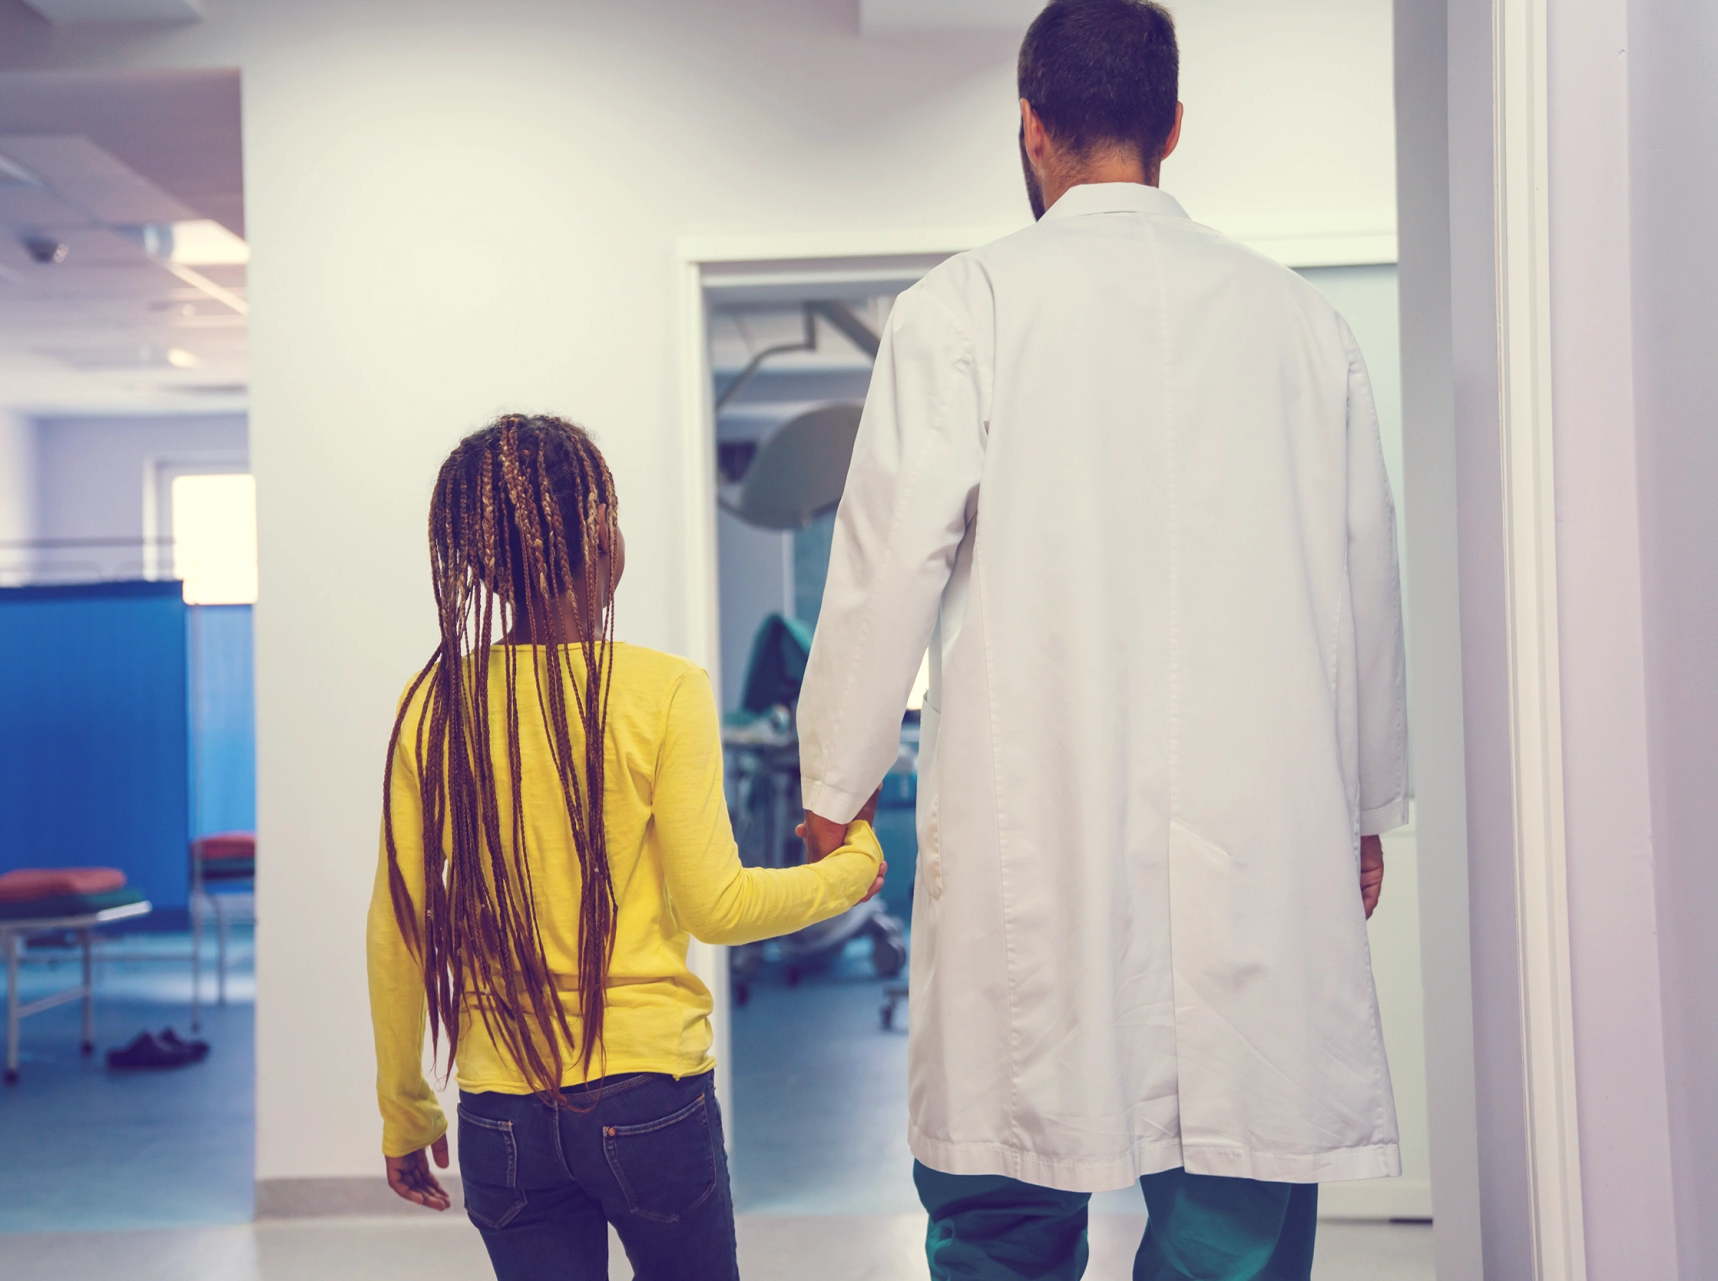 Young girl and doctor walk toward exam room in a hospital setting